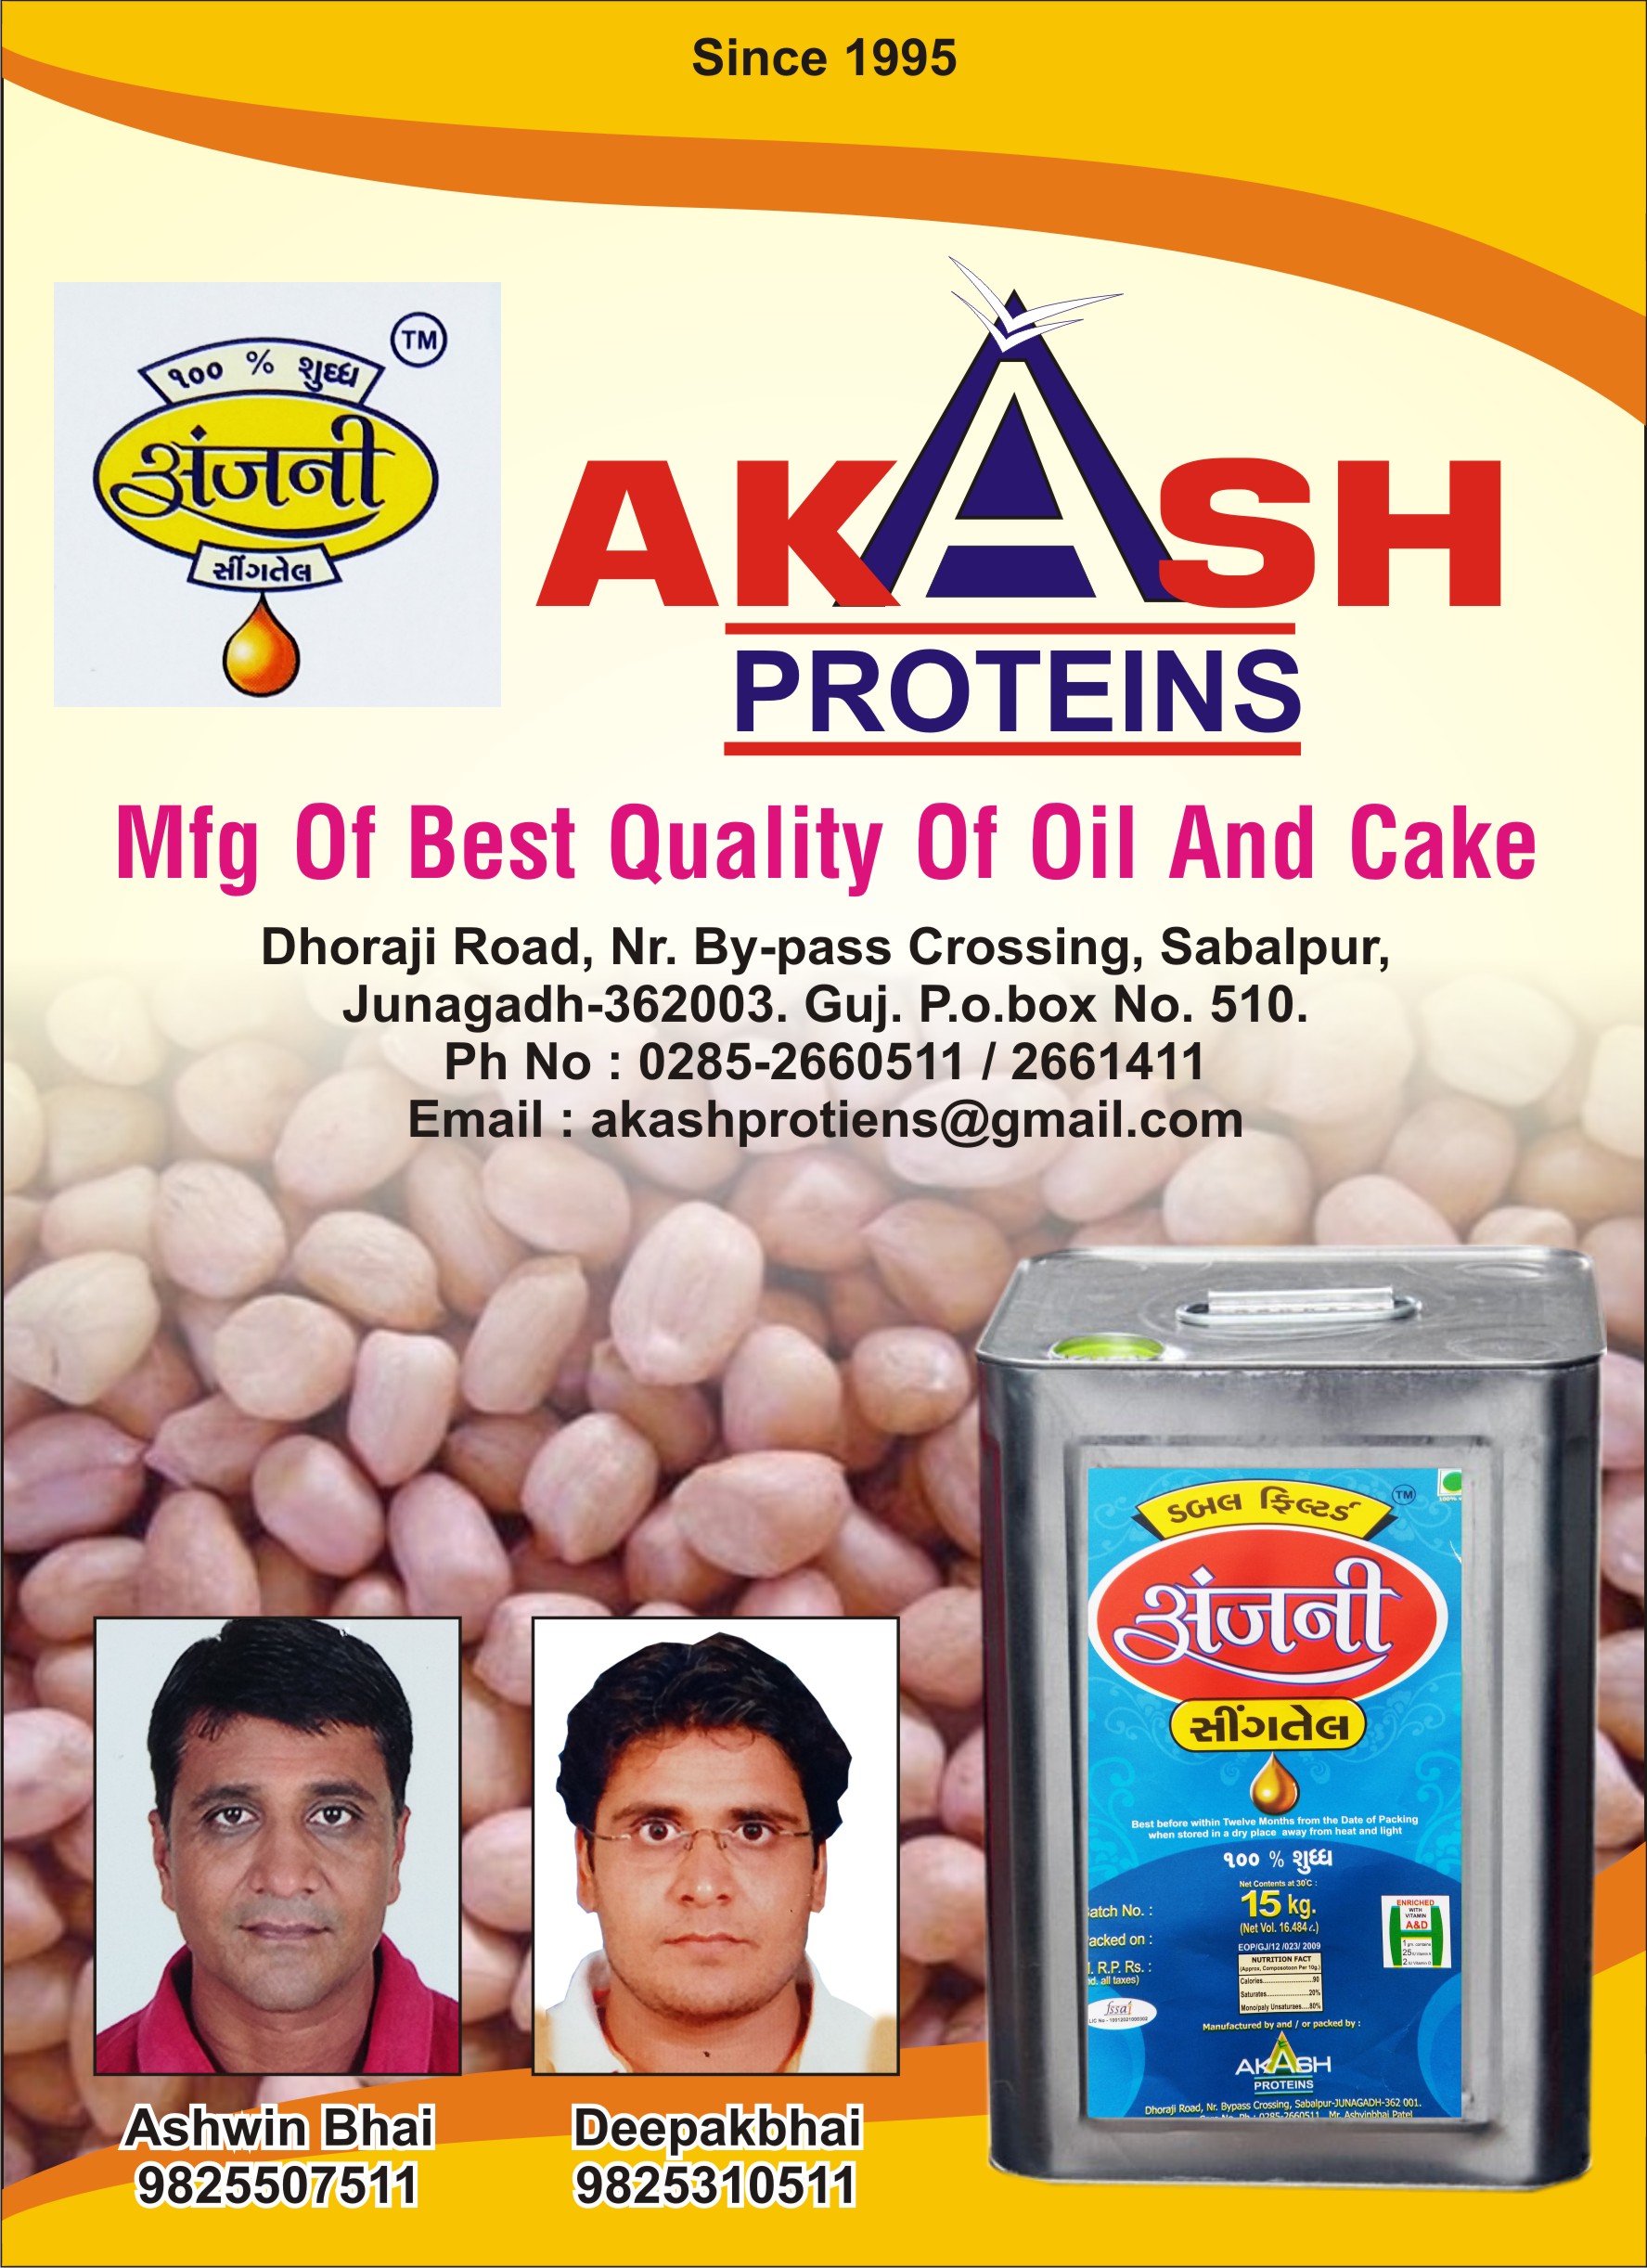 Akash Proteins - Manufactures Of Oil And Cake